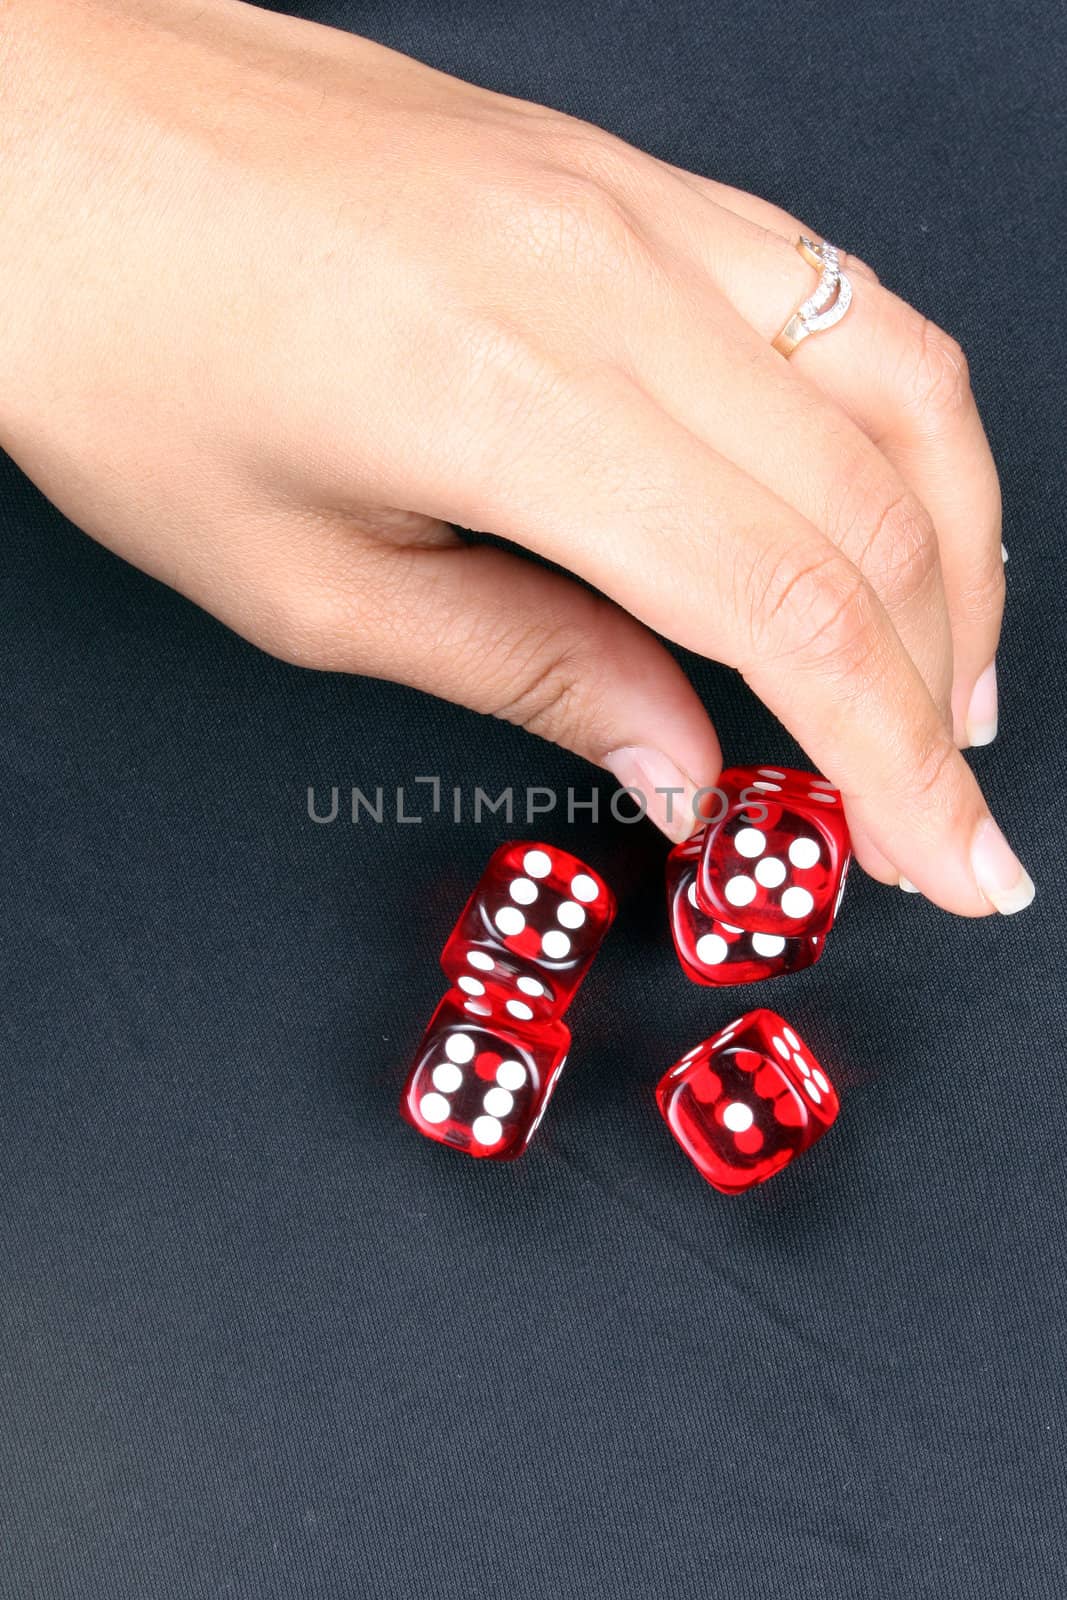 A hand picking up red gambling dices kept on a black fabric.